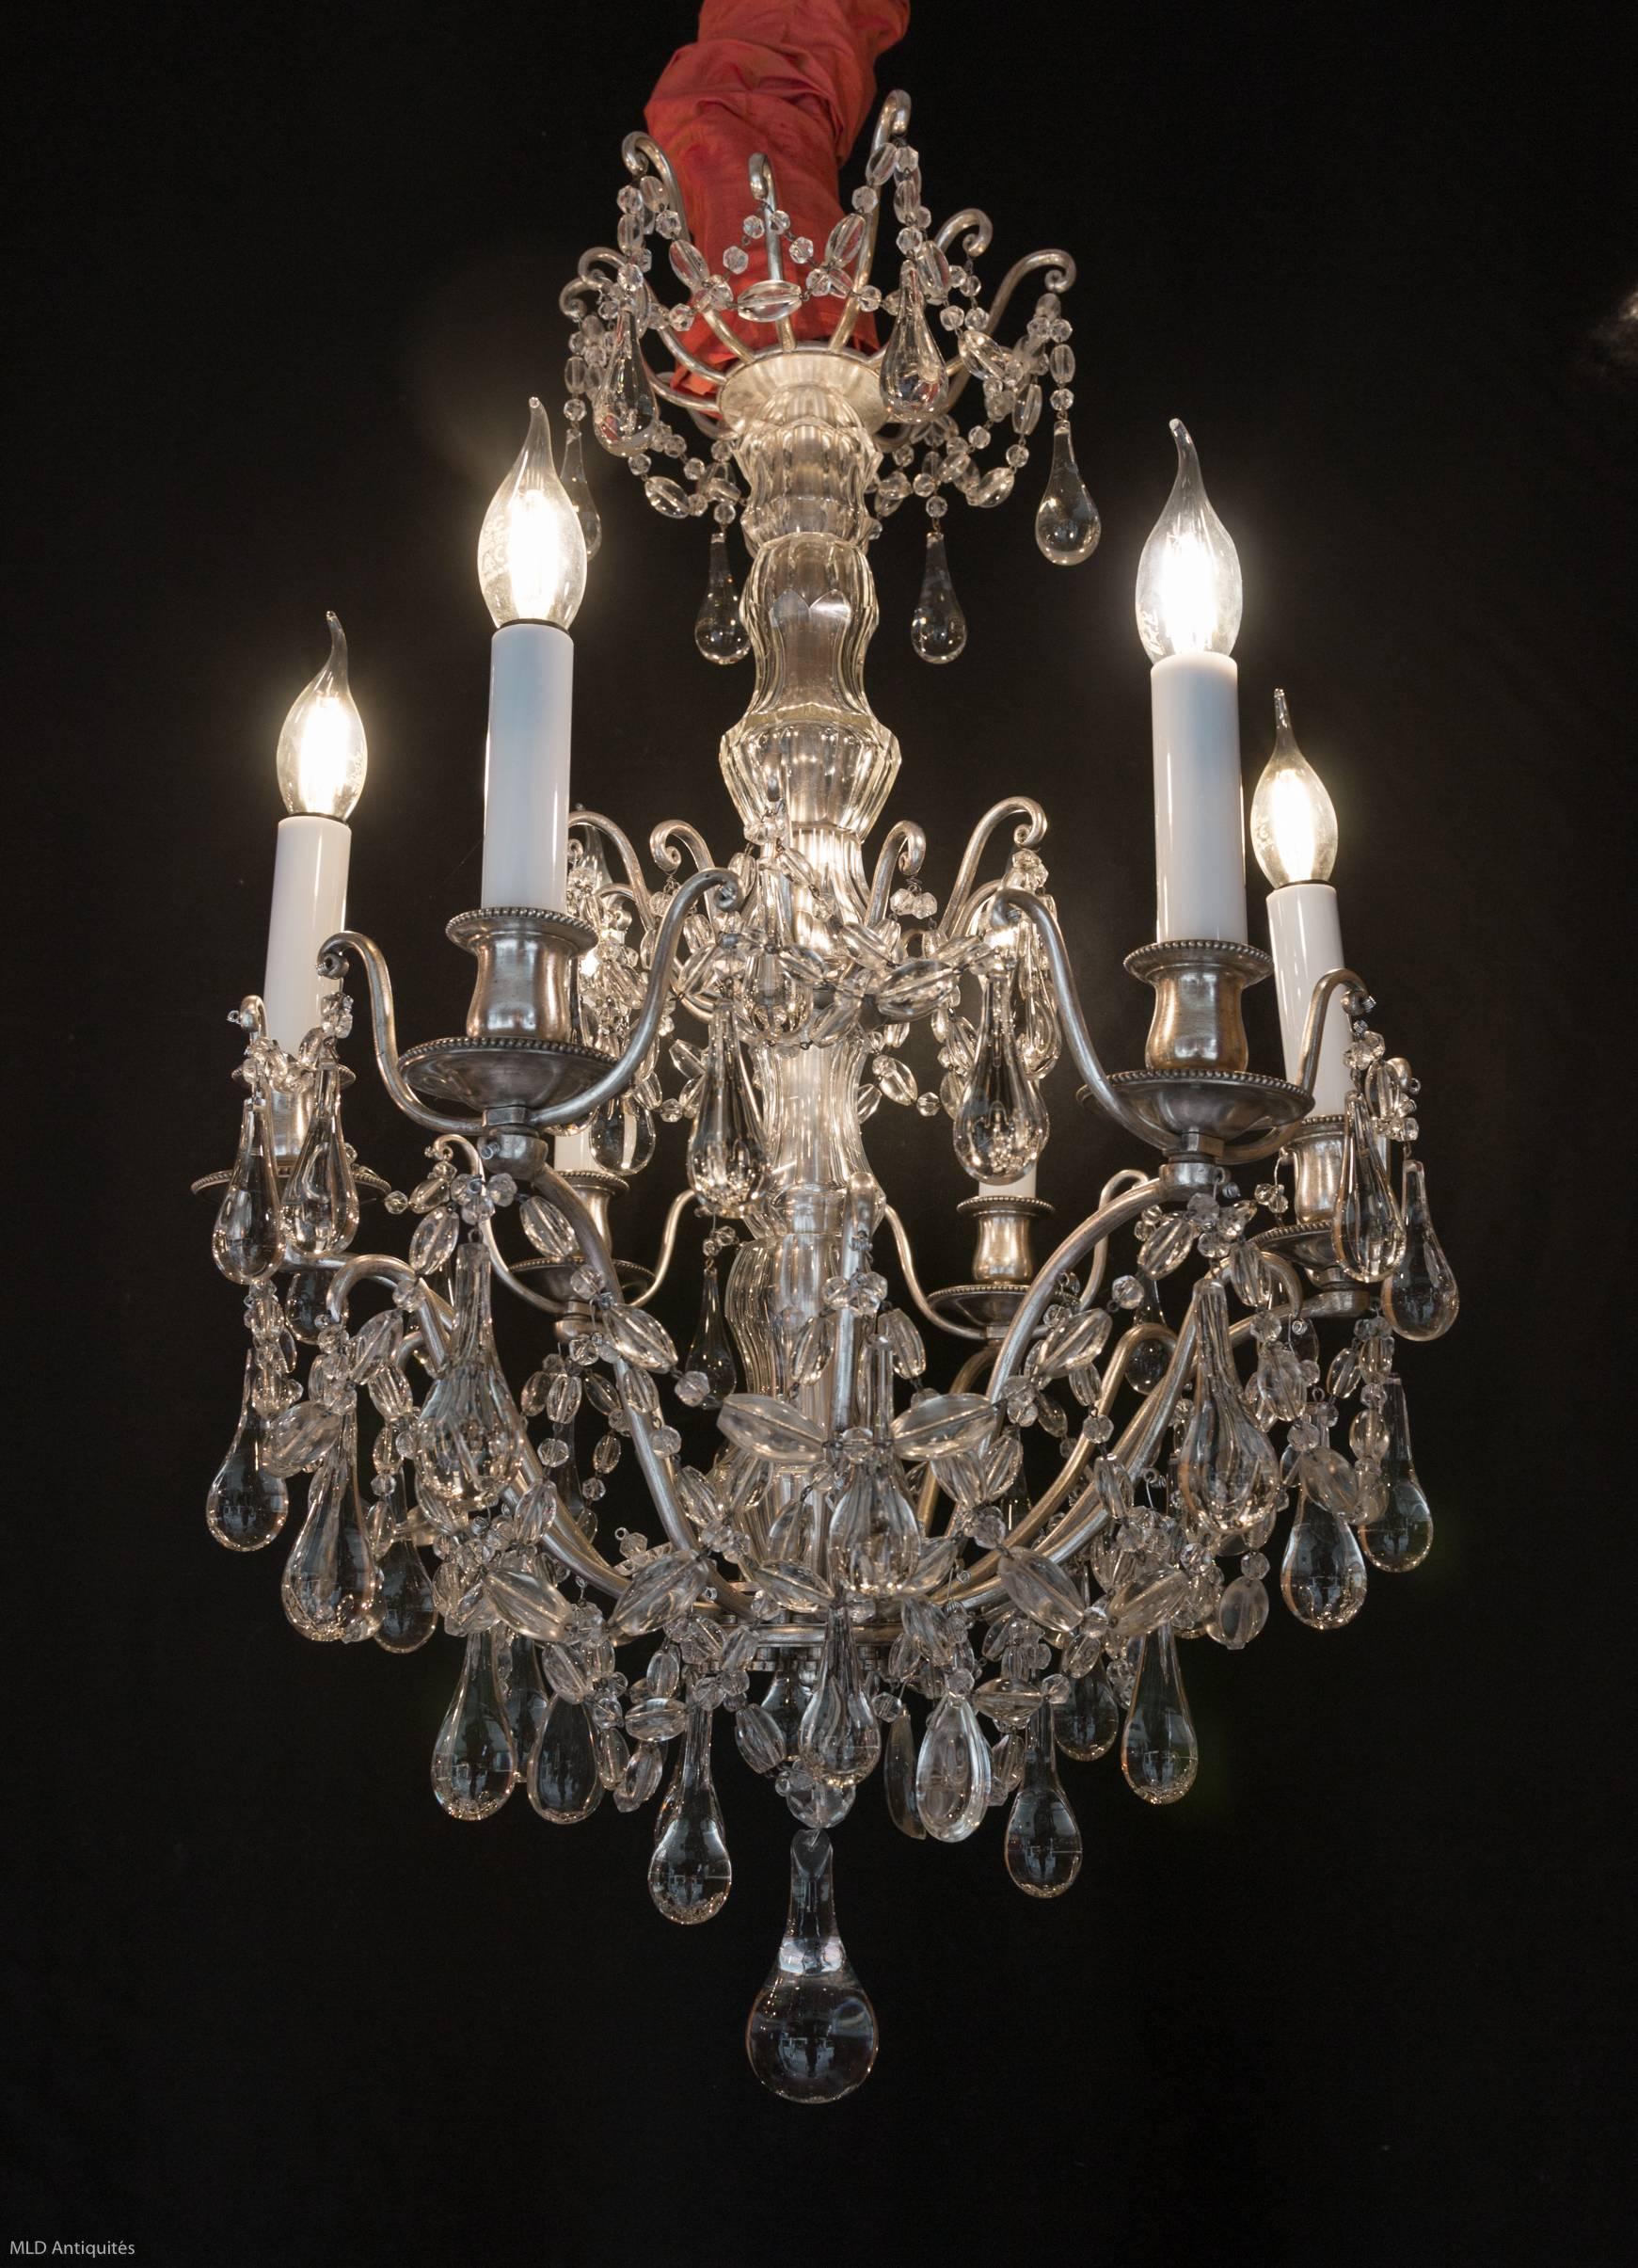 Lovely an decorative original old silver plate and hand cut crystal small chandelier in a classical Louis XVI style.
Interesting fine quality crystal, almond and water drops. The chandelier is terminated by a lovely crystal water dorps ball.
Our